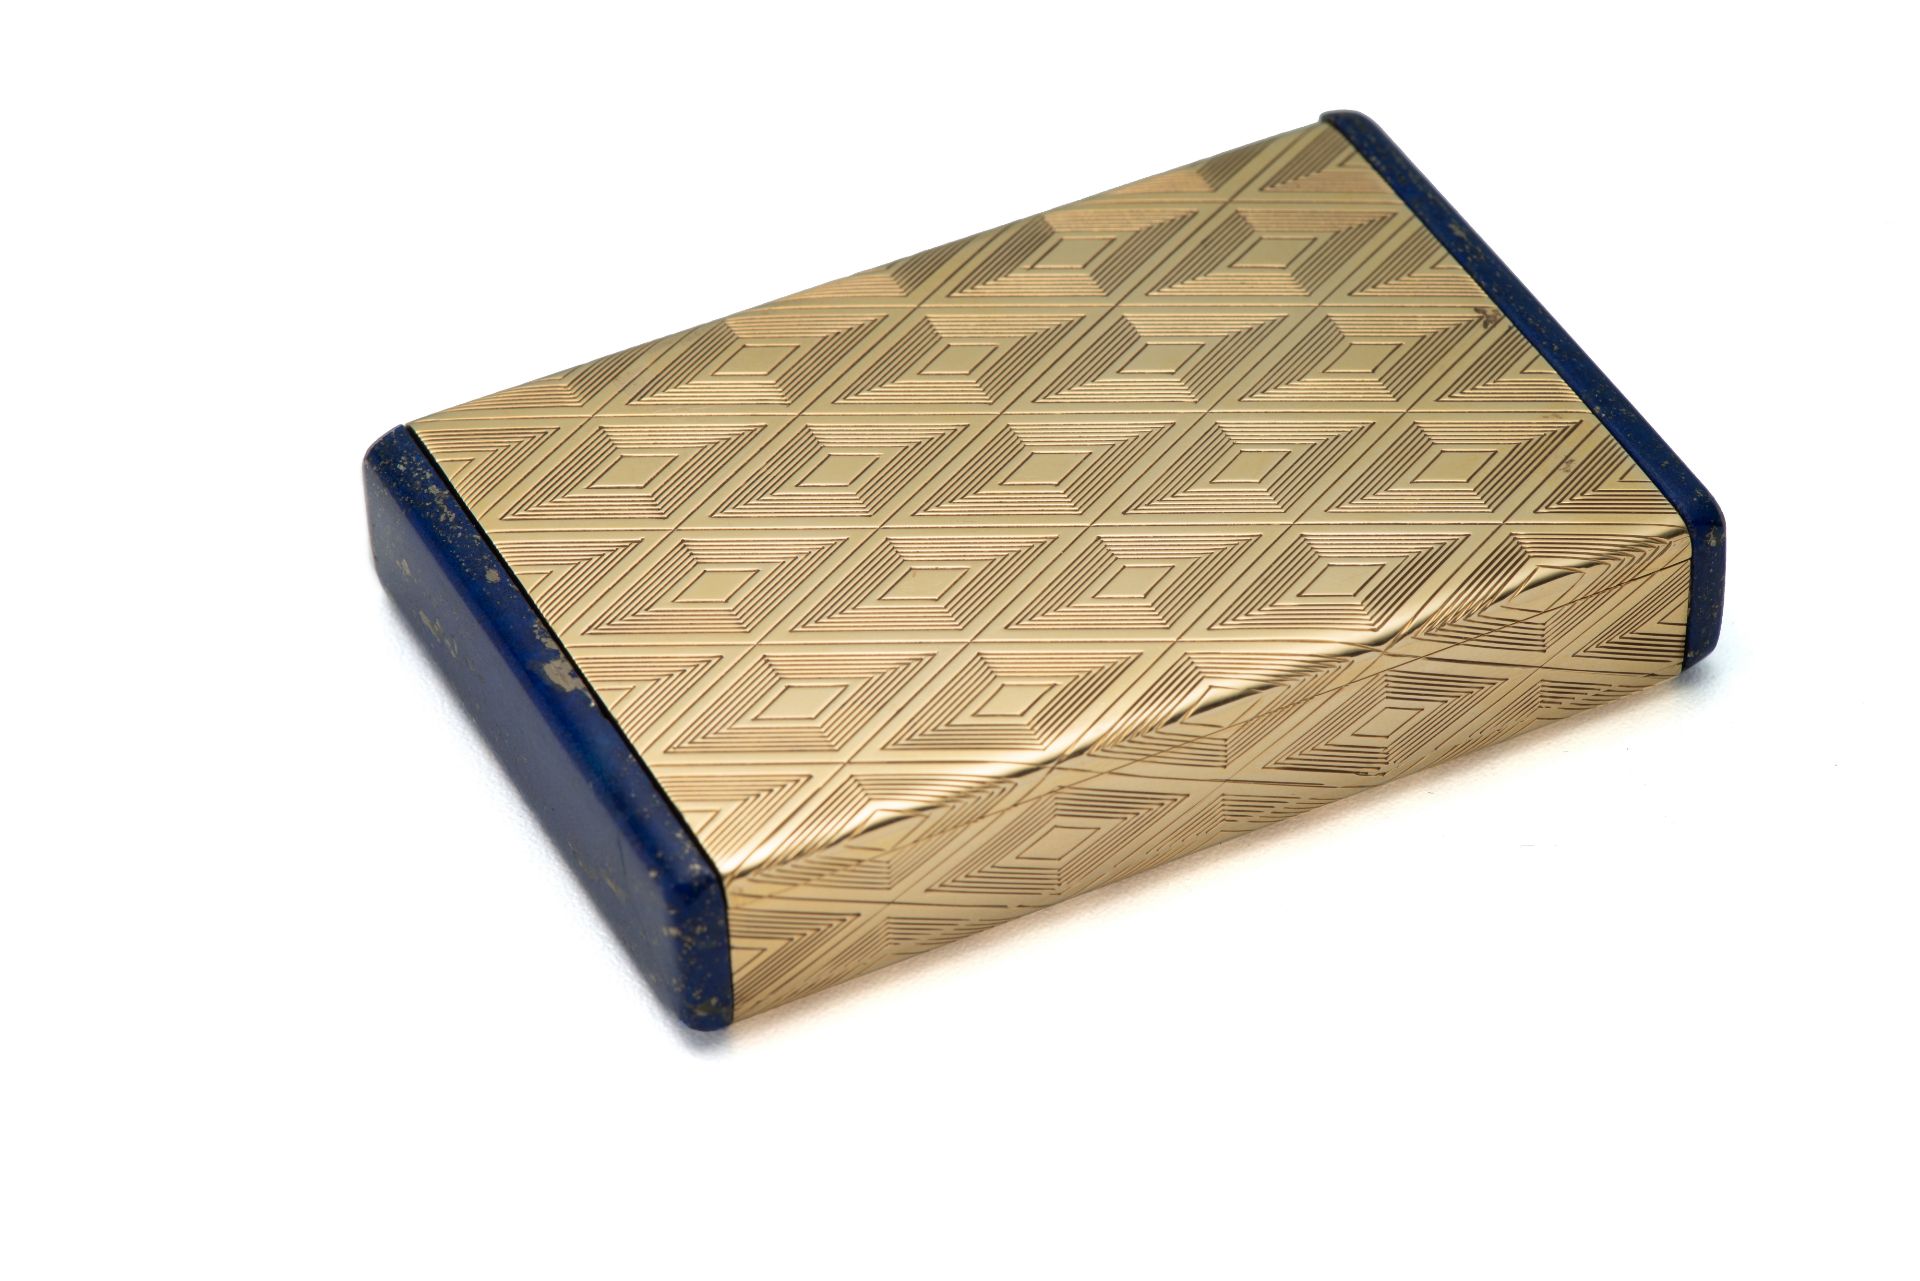 UNSIGNED, CIGARETTE BOX, YELLOW GOLD AND LAPIS-LAZULI. Very fine and rare 14k yellow [...]